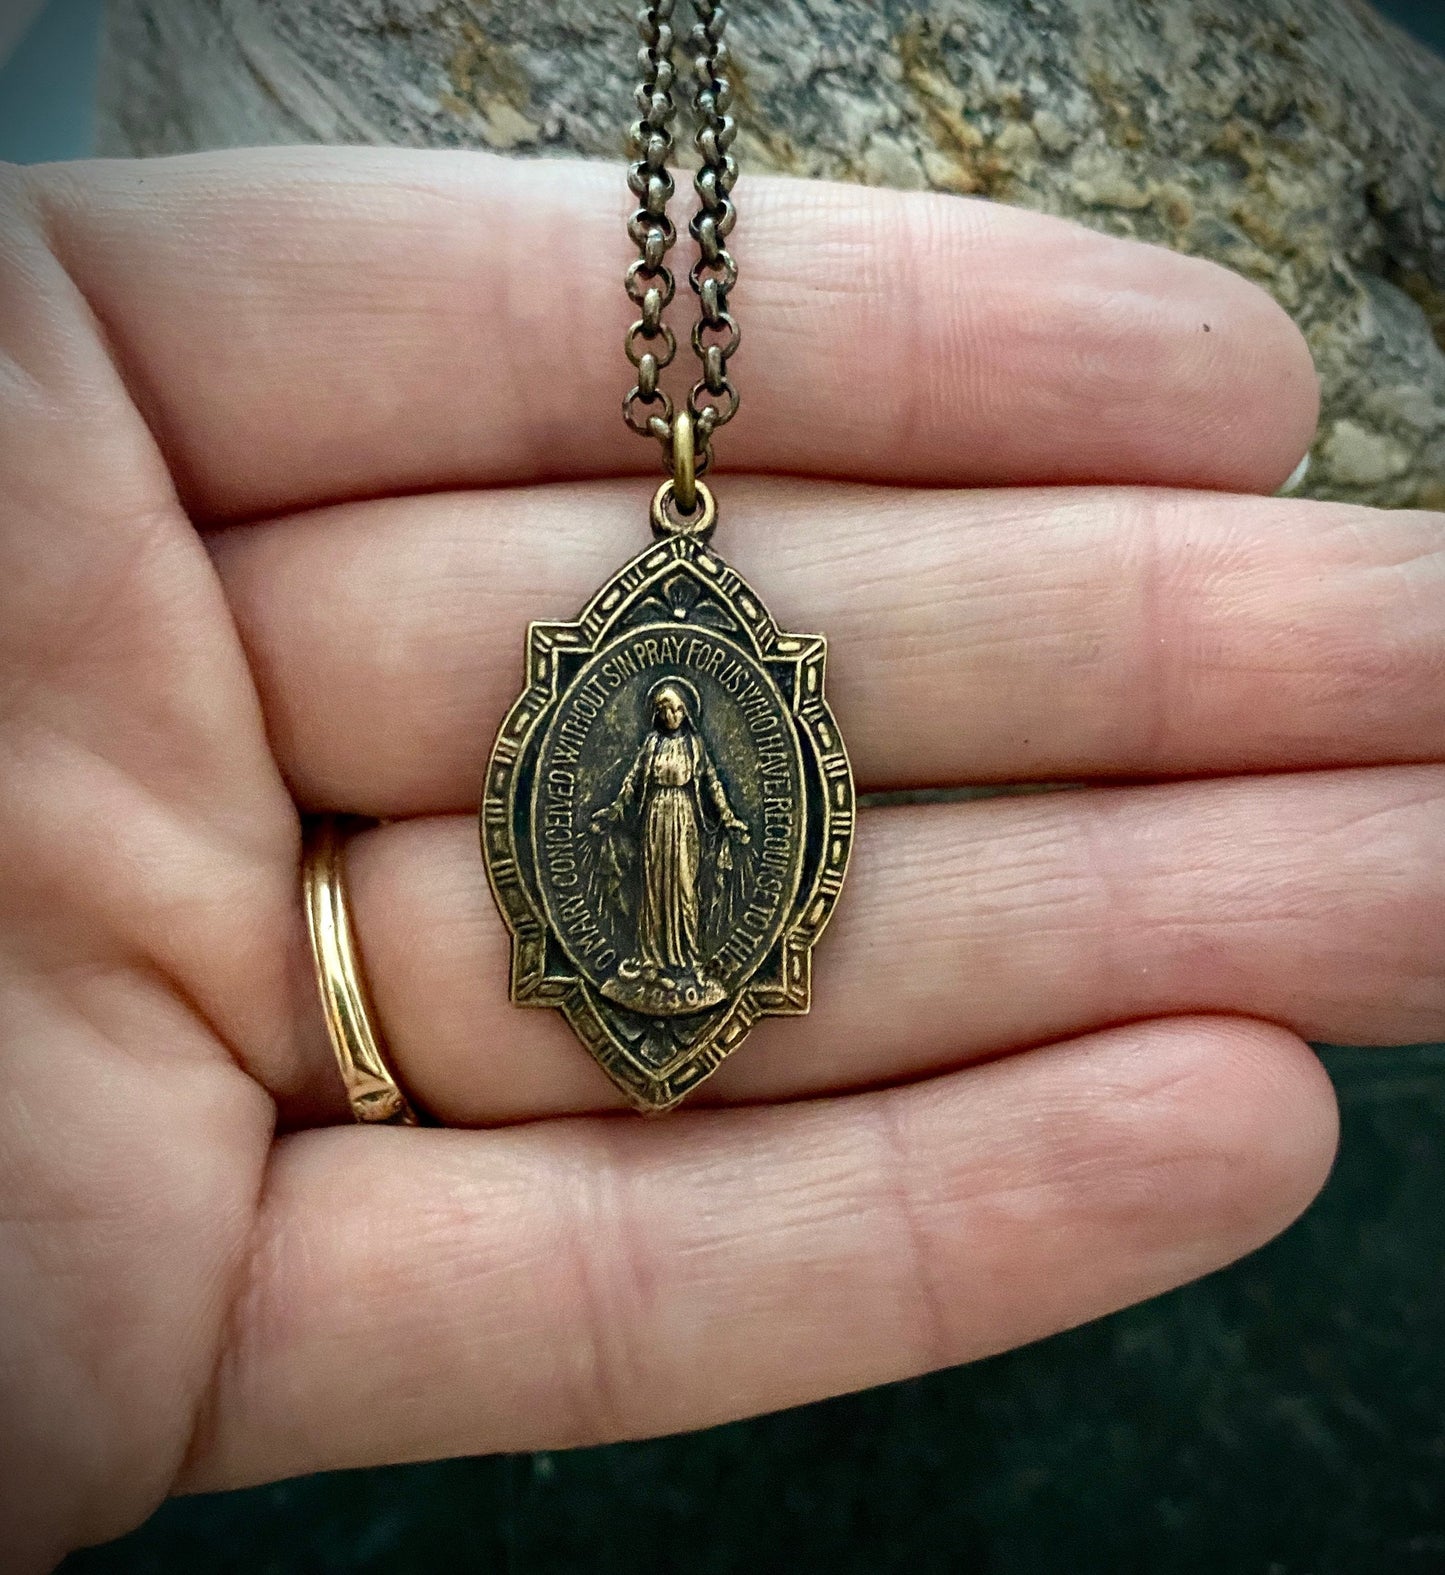 Men's Miraculous Medal featuring a depiction of the Blessed Mother Mary, Brass Necklace Chain, 20 or 24 Inch Chain, BR-015